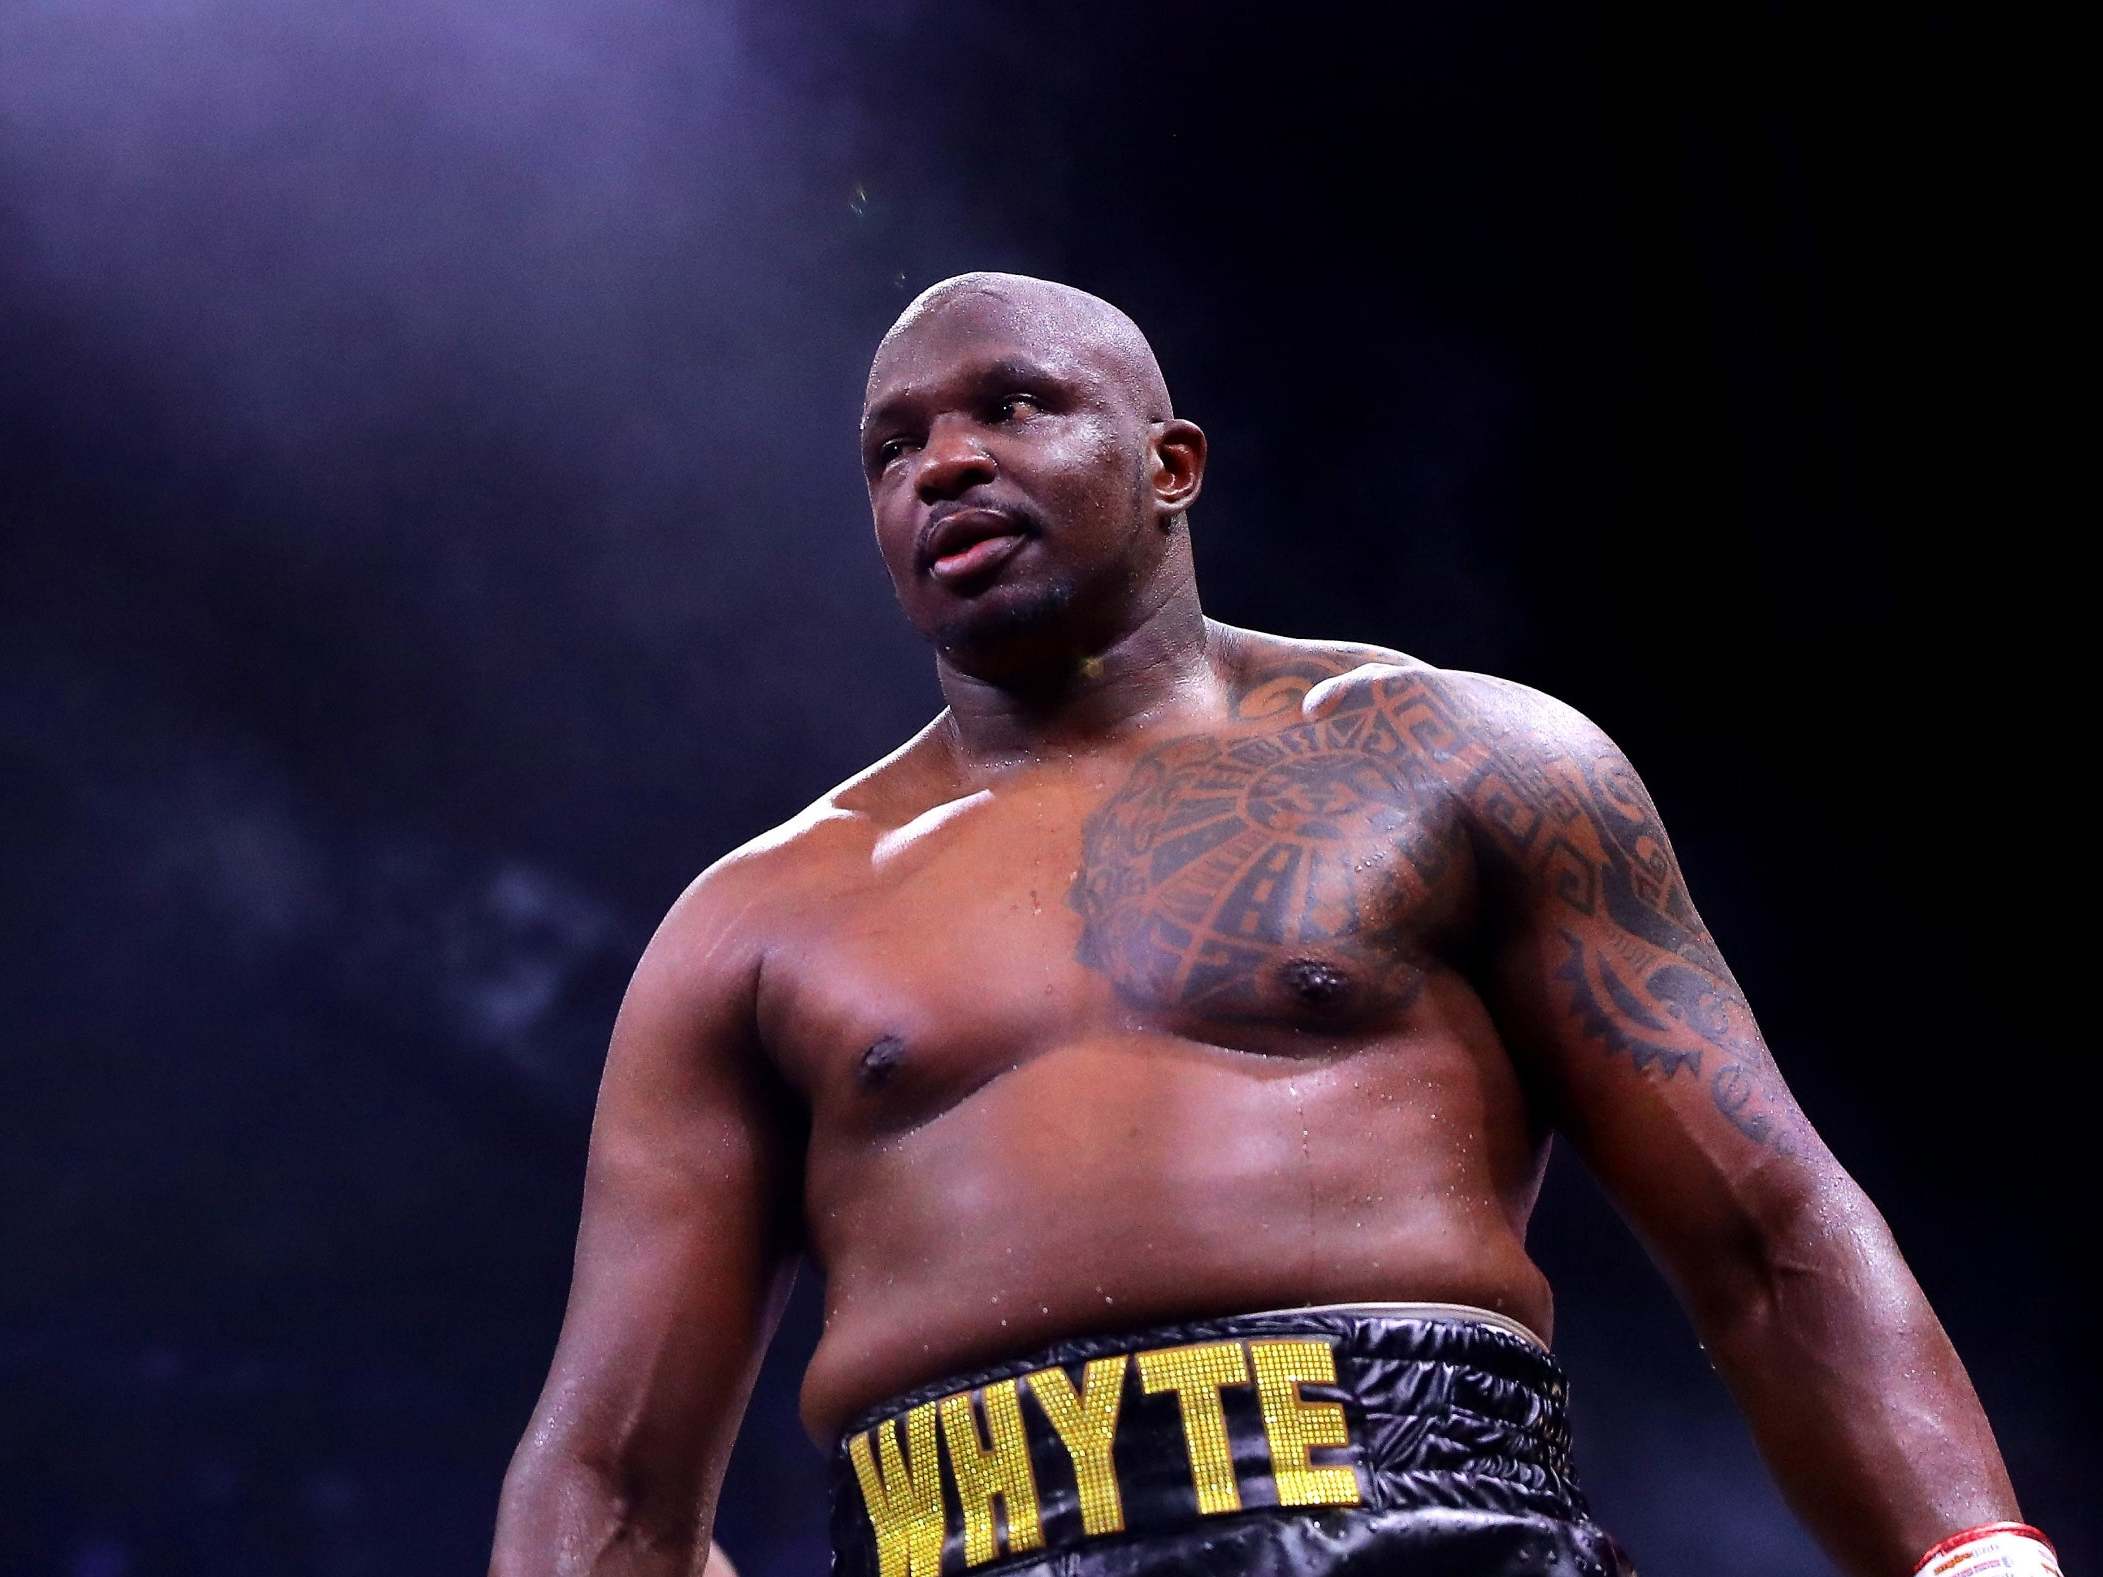 Dillian Whyte is working his way to a title shot